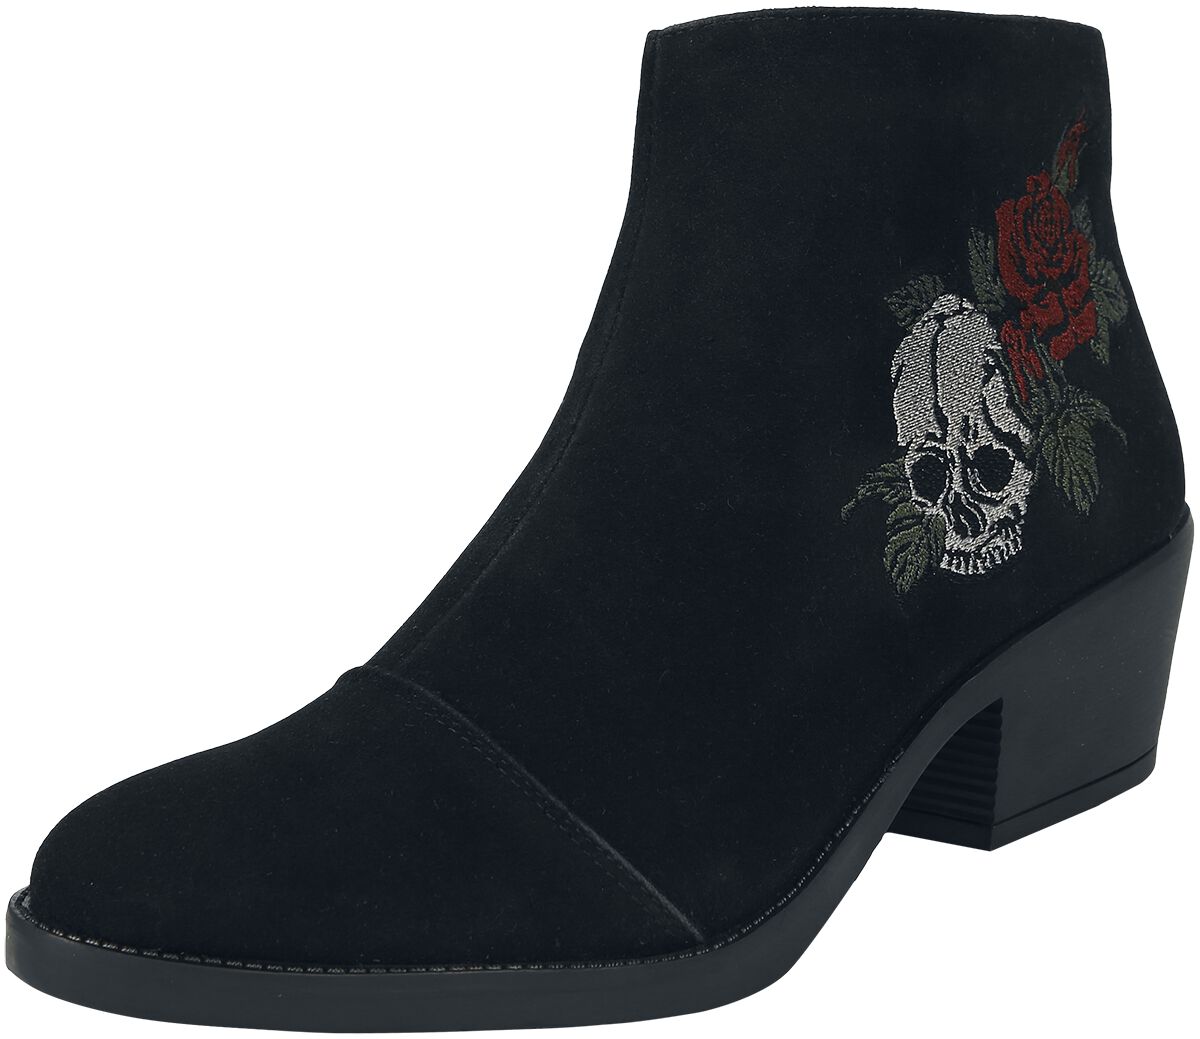 Image of Stivali Rockabilly di Rock Rebel by EMP - Boot with rose and skull embroidery - EU37 a EU41 - Donna - nero